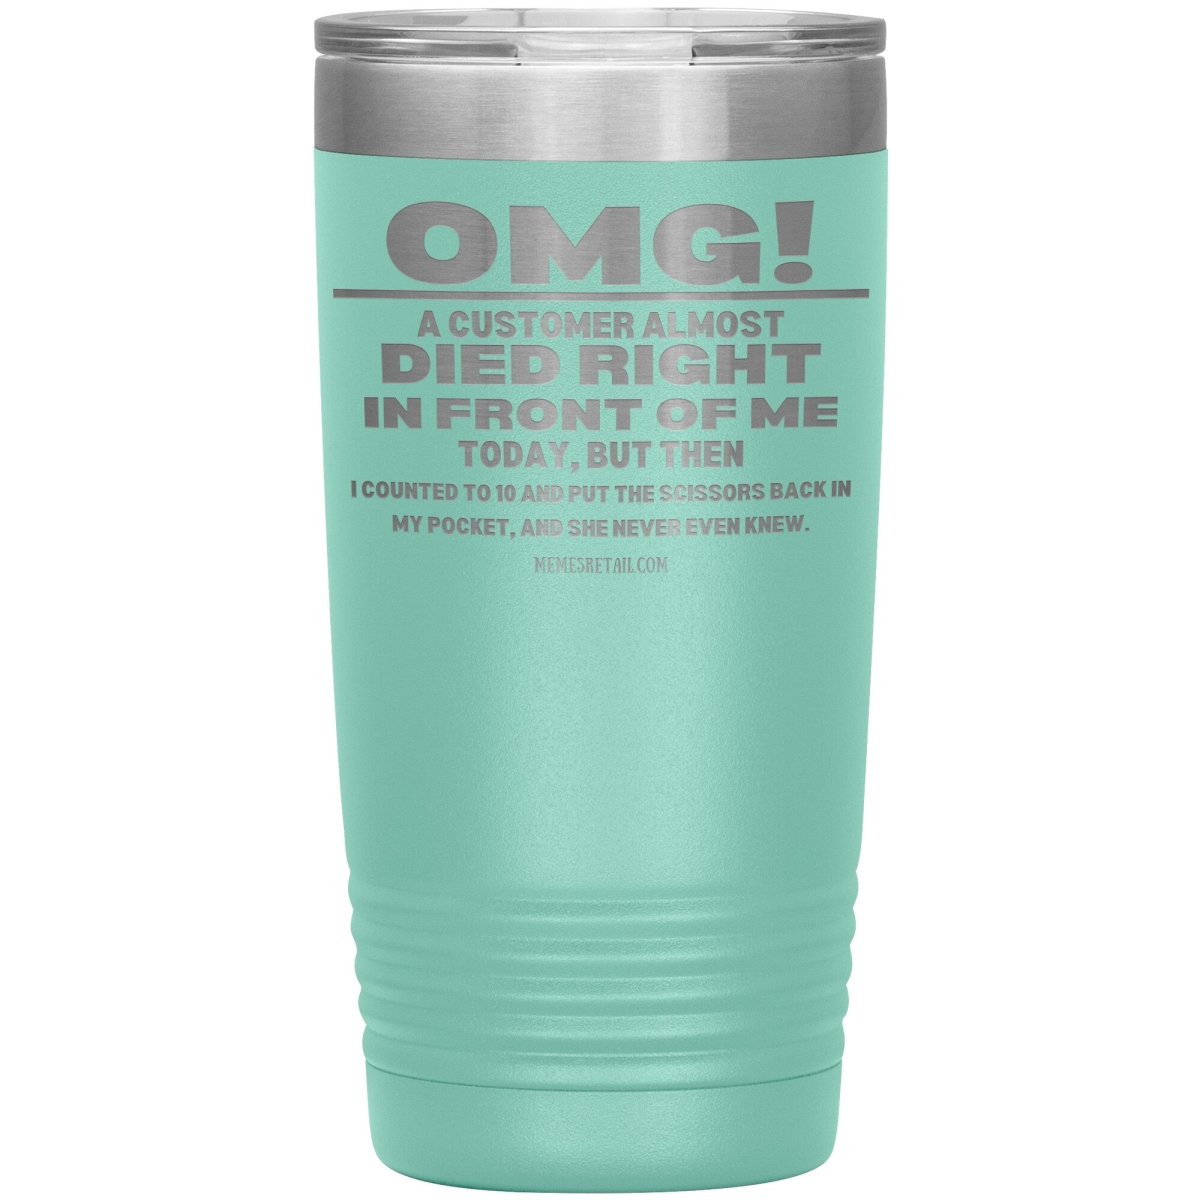 OMG! A Customer Almost Died Right In Front Of Me Tumbler, 20oz Insulated Tumbler / Teal - MemesRetail.com